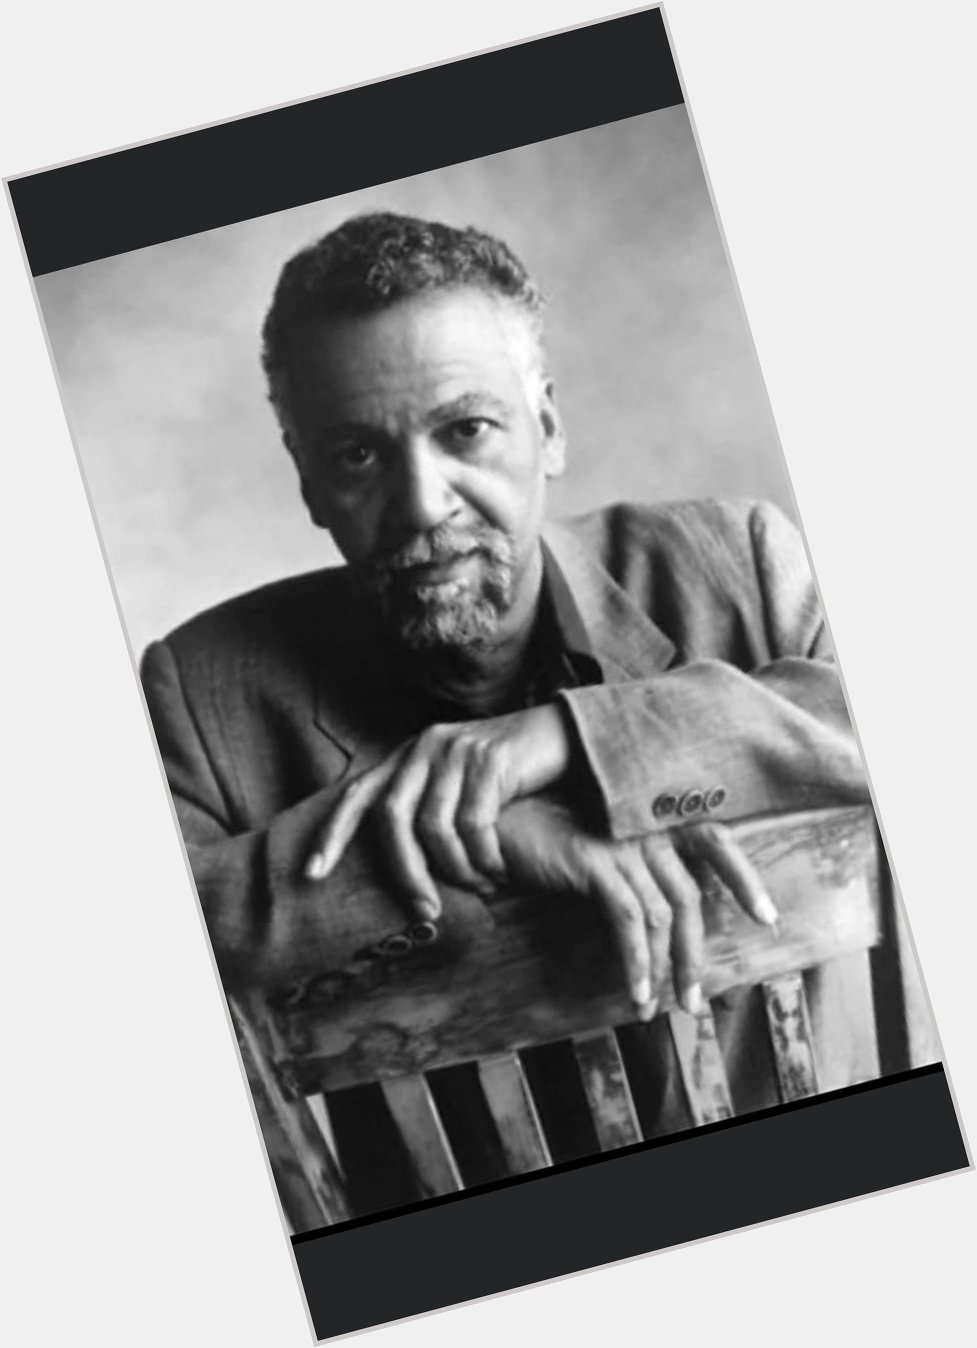 Joe Sample, one of the best jazzmen of our time. Happy Birthday! 